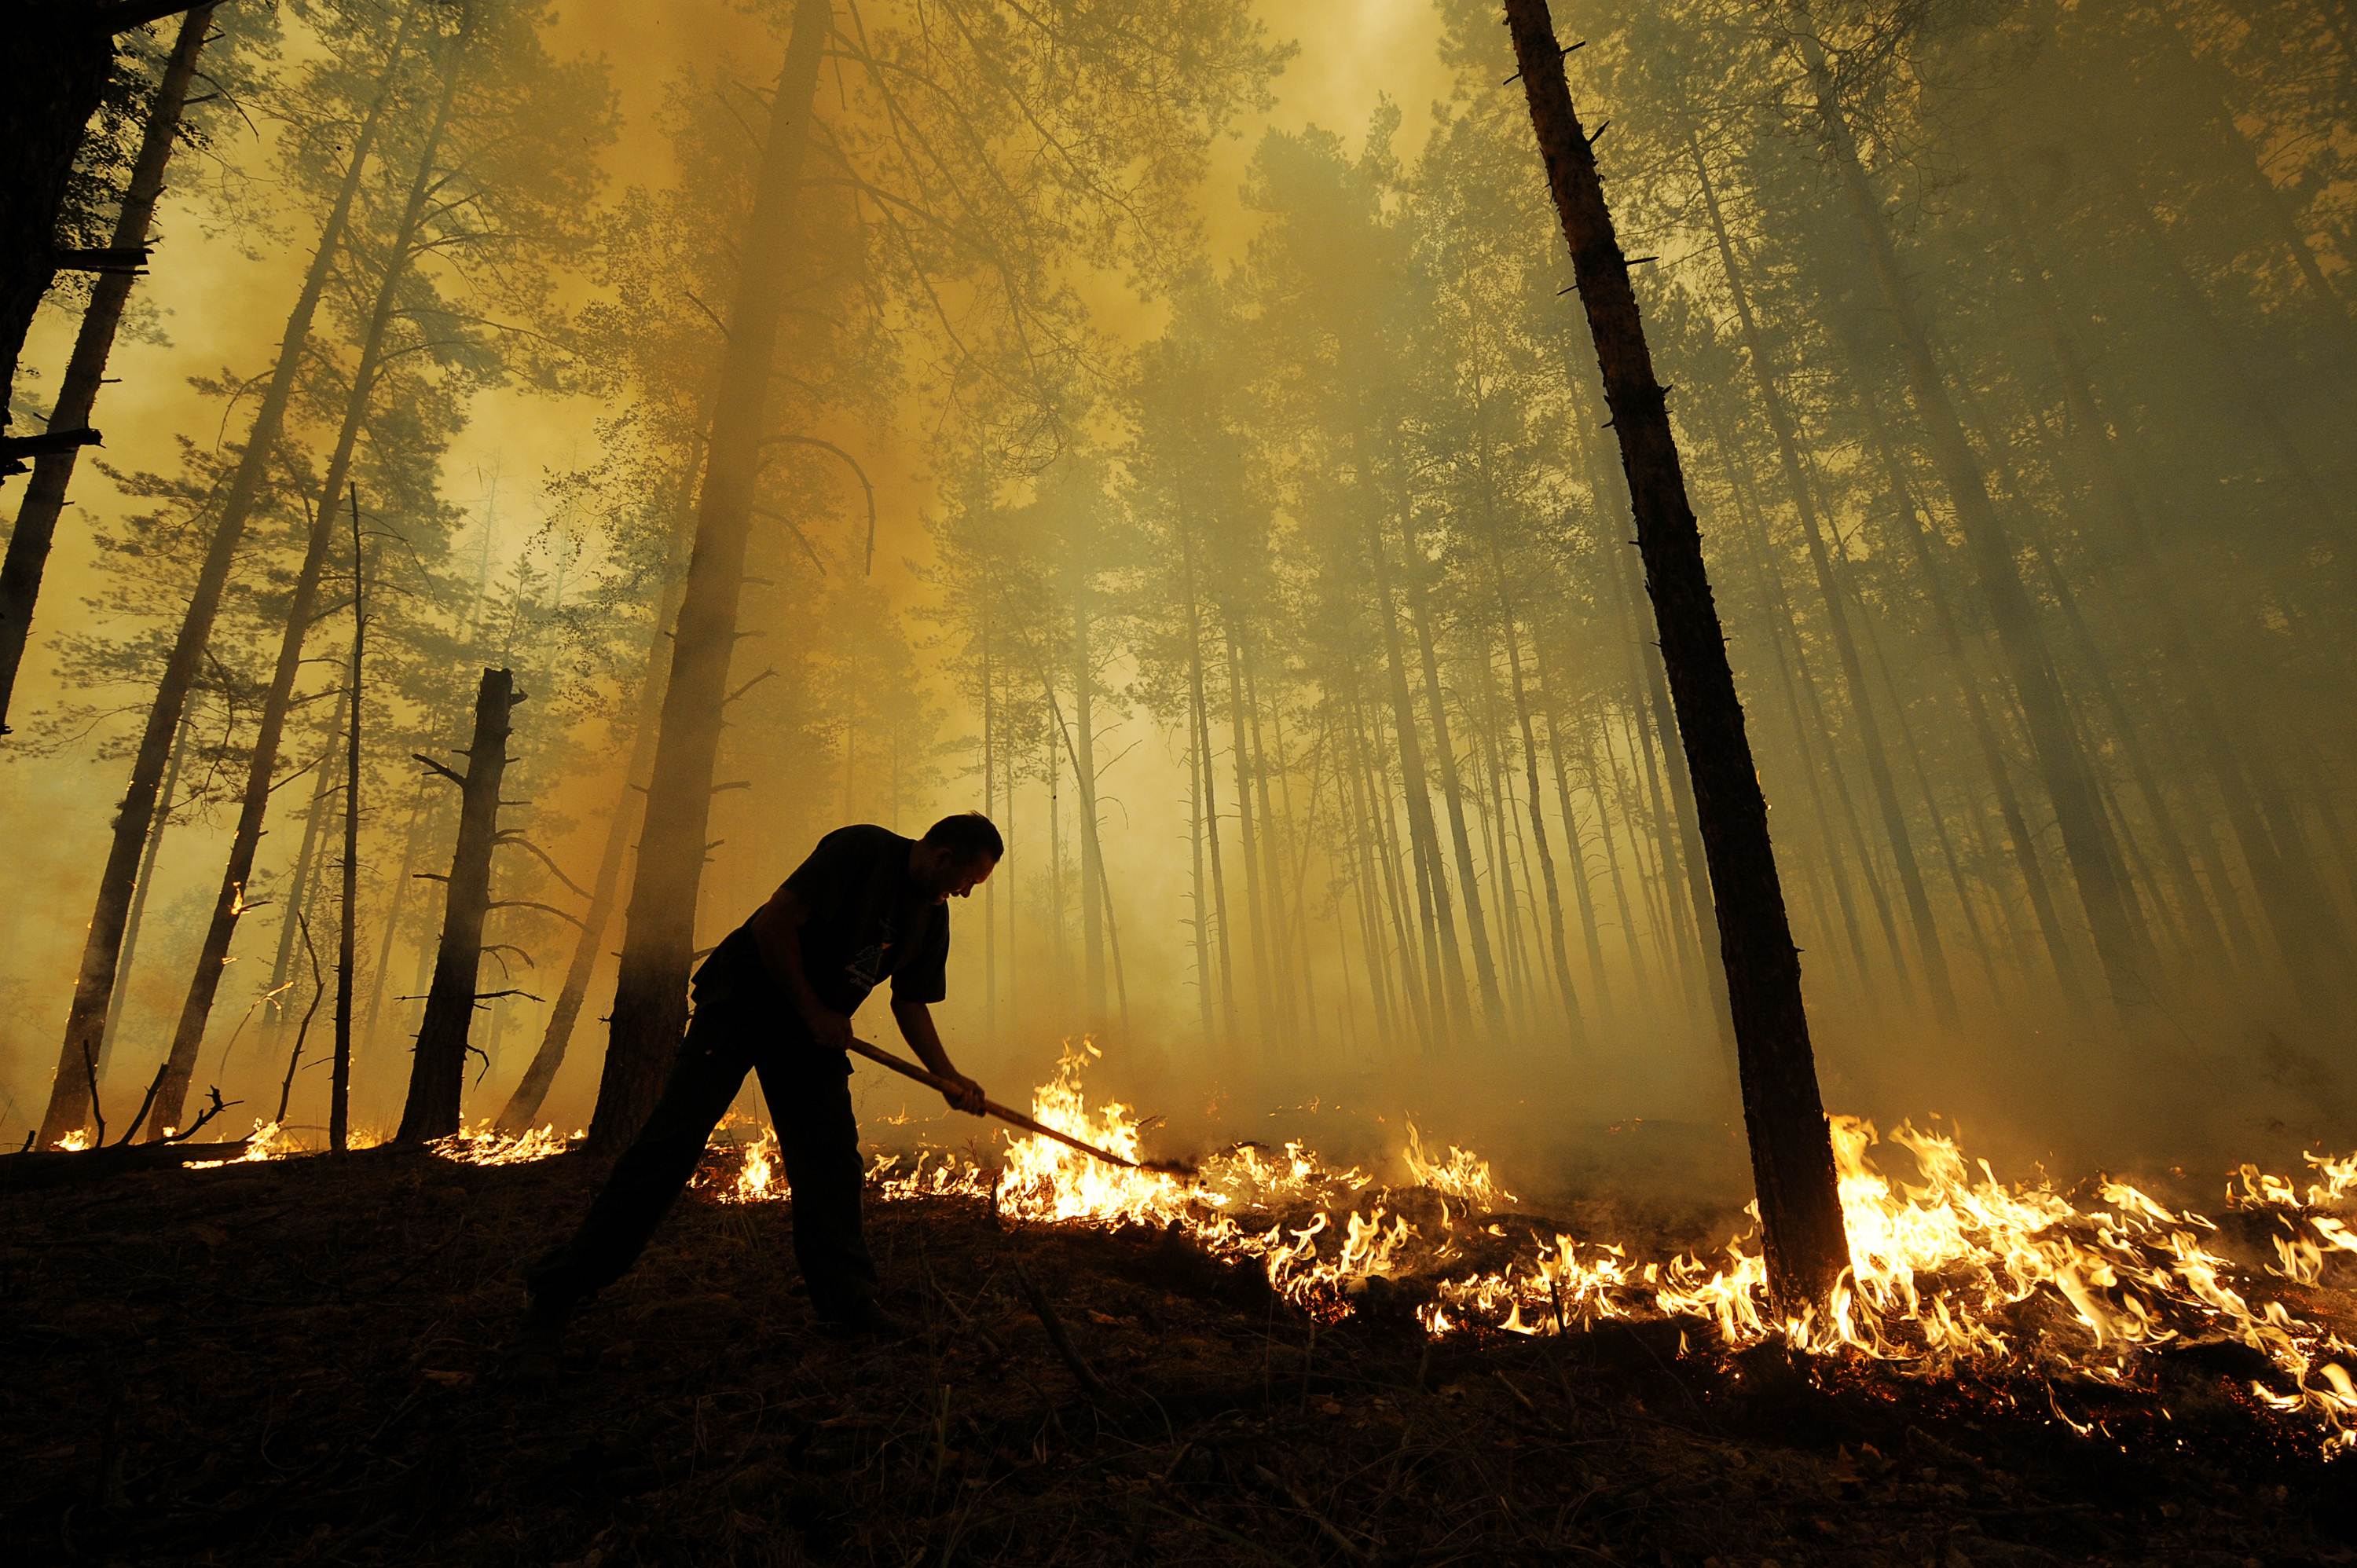 (FILES) This file photo taken on August 05, 2010 shows a Russian trying to stop fire near the village of Golovanovo, Ryazan region. Russia's practice of leaving massive wildfires to burn out of control in sprawling stretches of Siberia puts at risk a key global resource for absorbing climate-warming emissions: its trees. / AFP PHOTO / Natalia KOLESNIKOVA